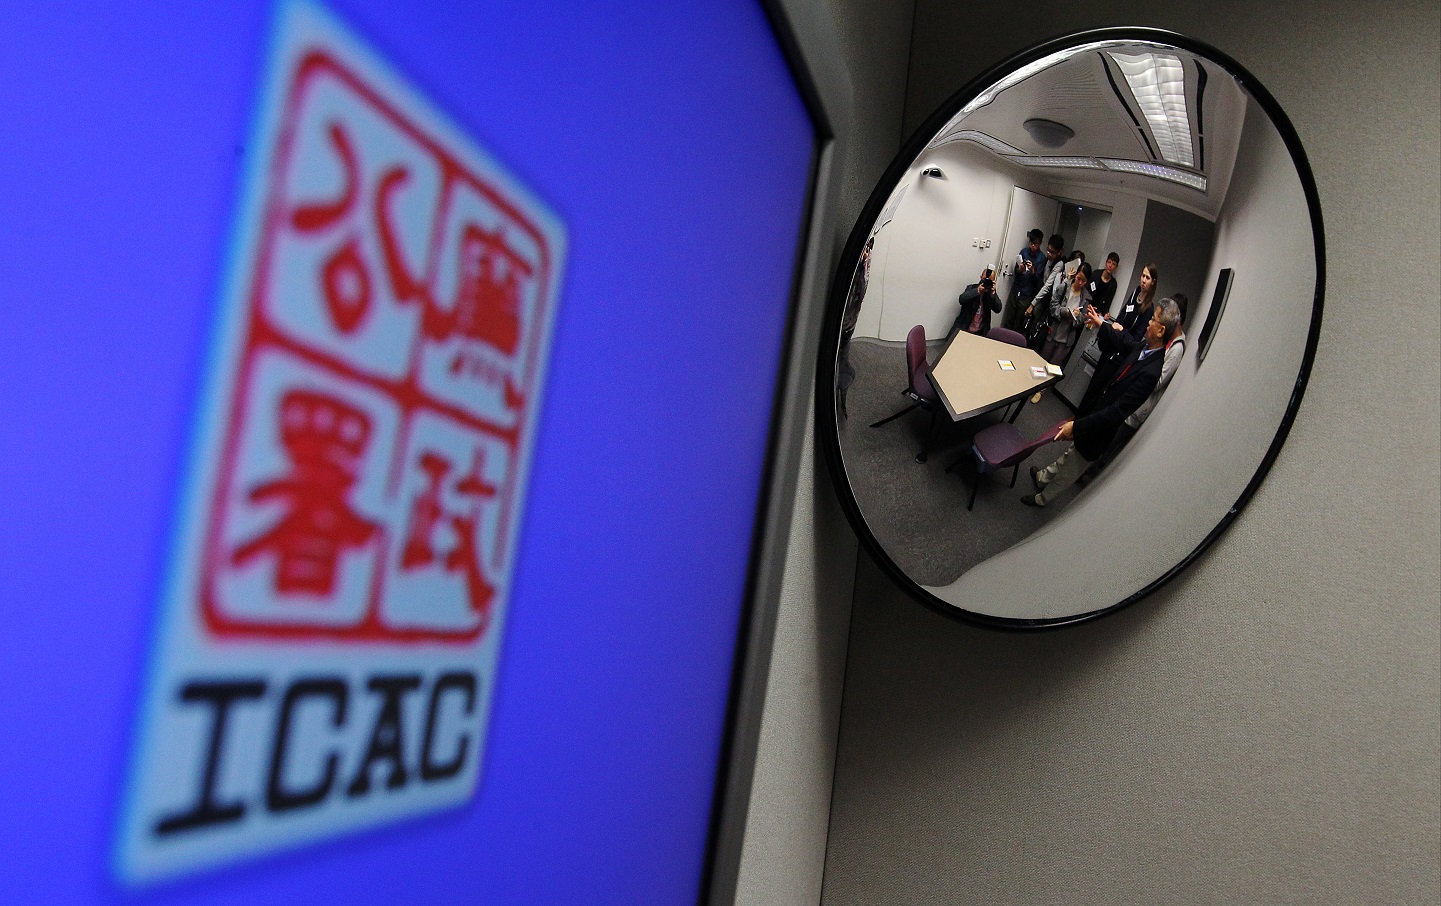 The ICAC model is unlikely to be transferred to mainland China. Photo: Felix Wong